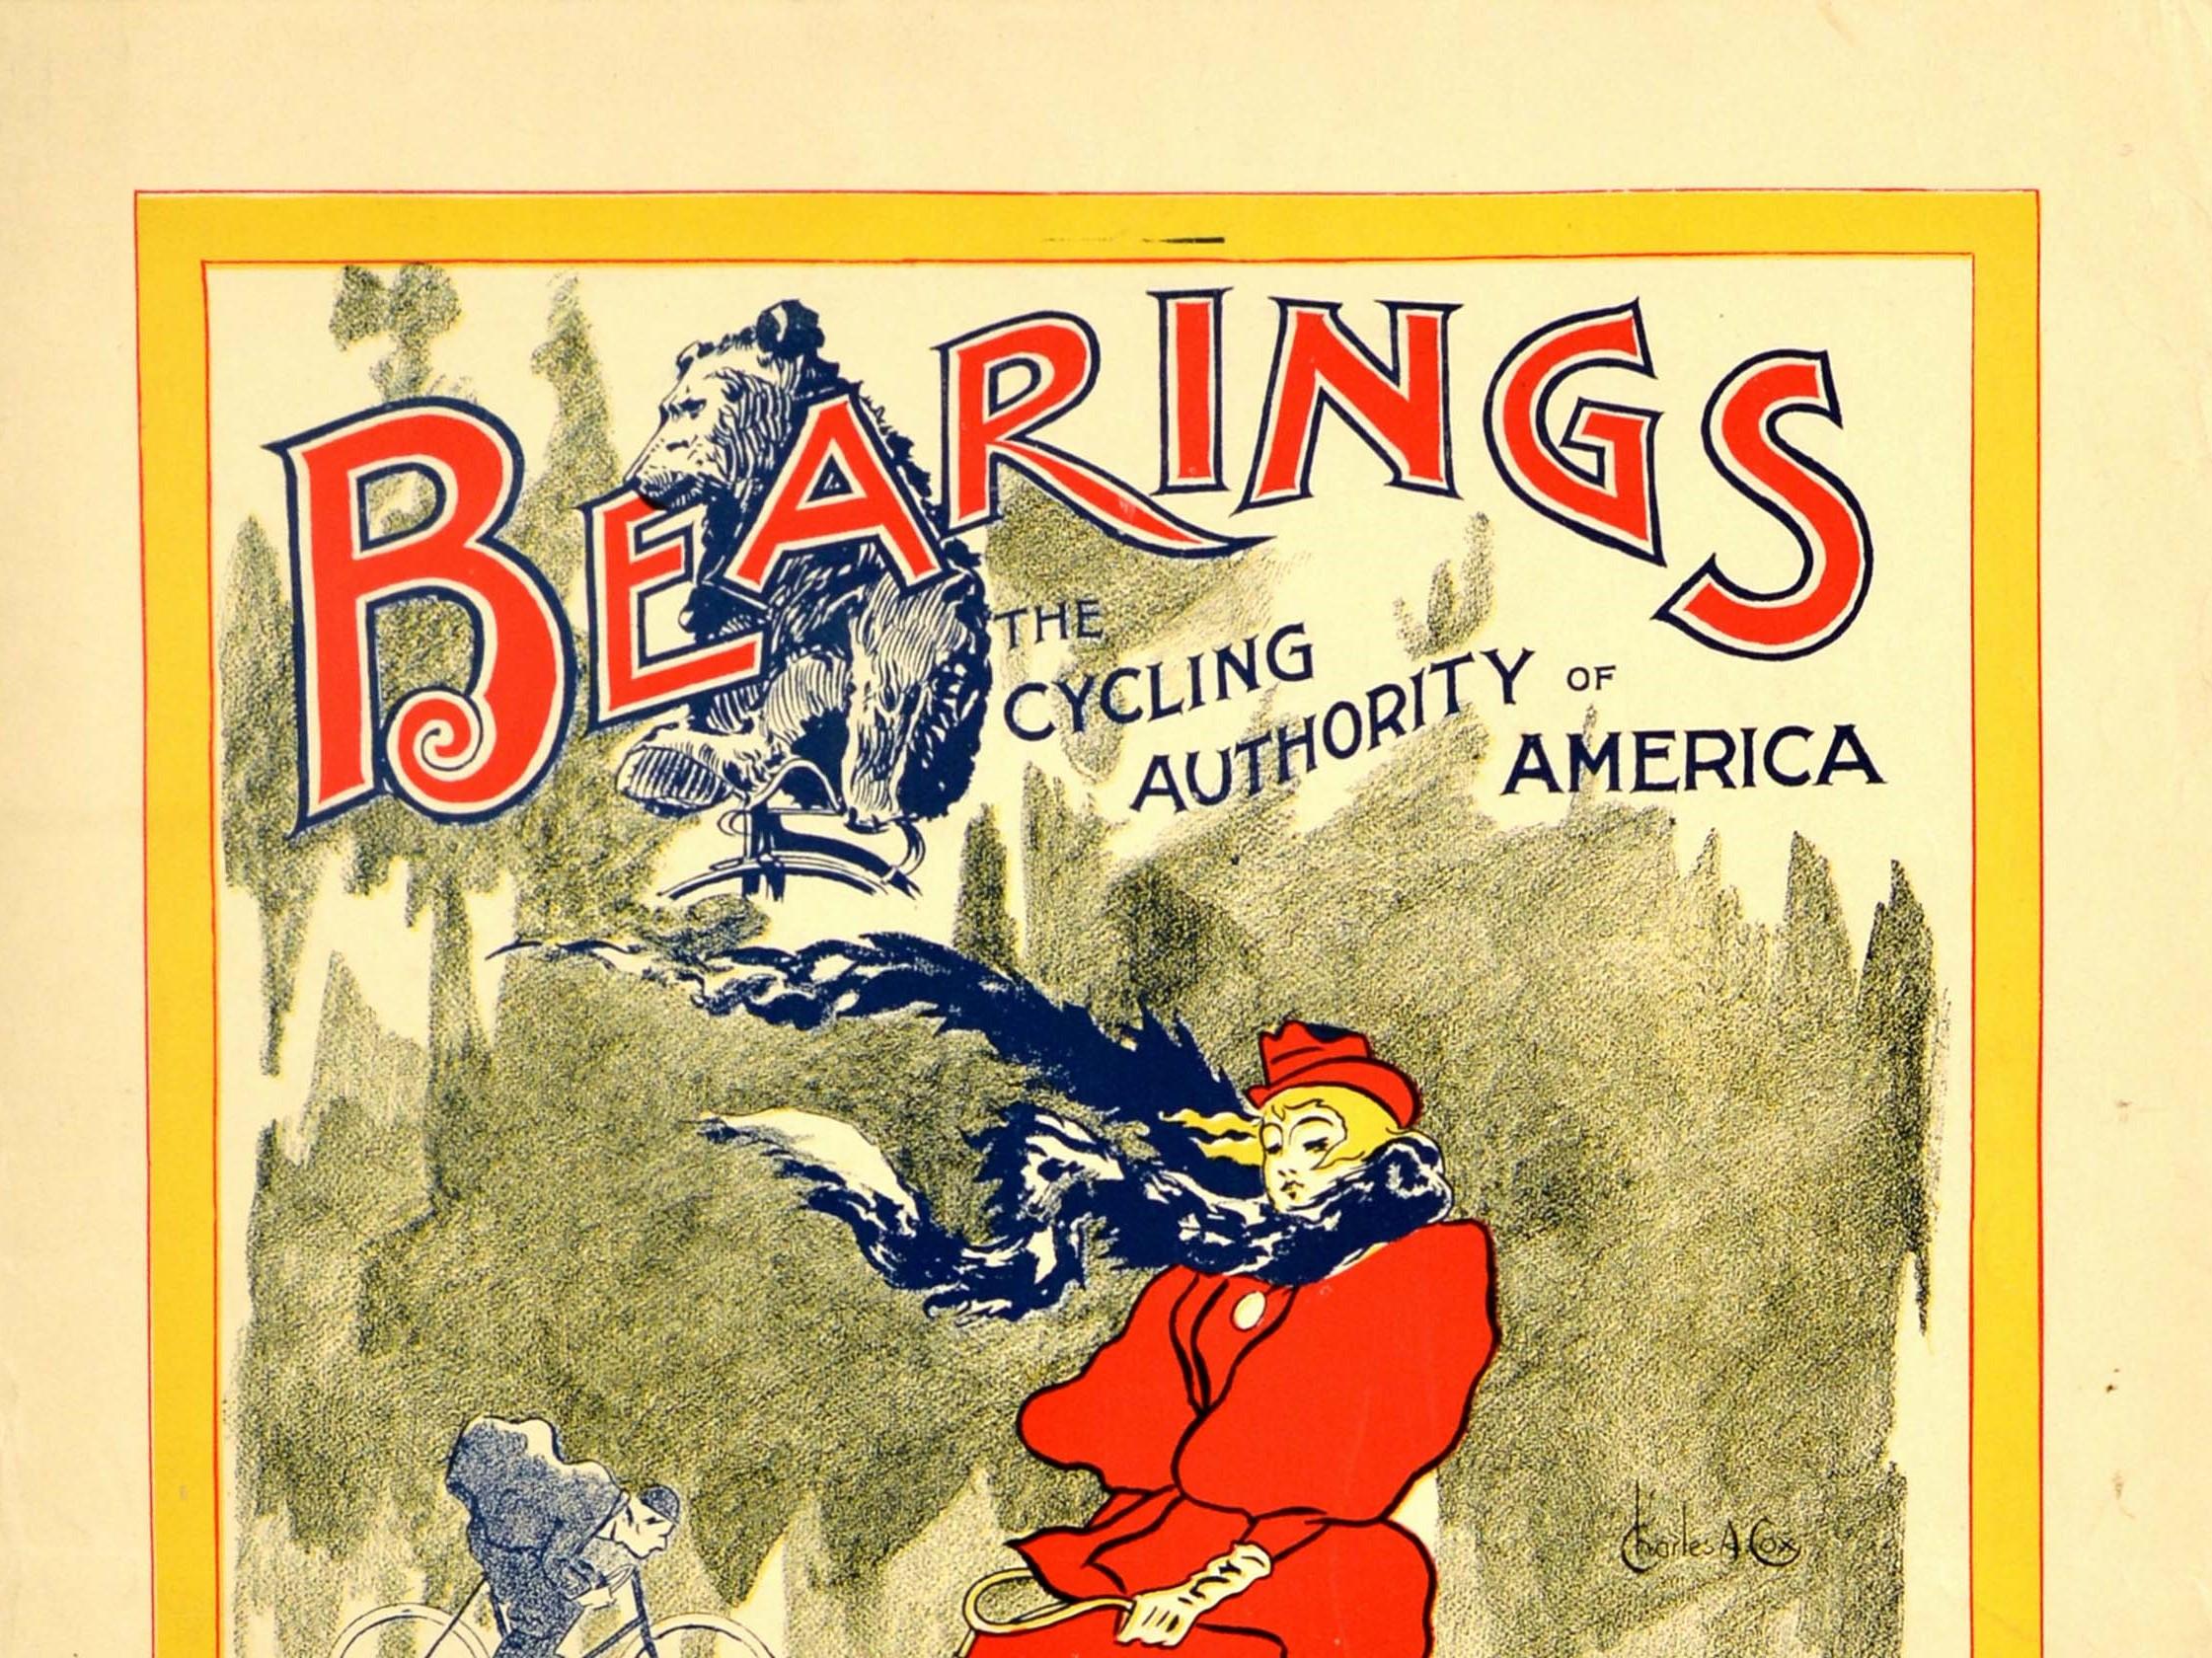 Original antique advertising poster for a popular cycling magazine - Bearings The Cycling Authority of America Out Today For Sale Here - featuring a great Art Nouveau style design by the American artist Charles Arthur COX depicting a fashionably